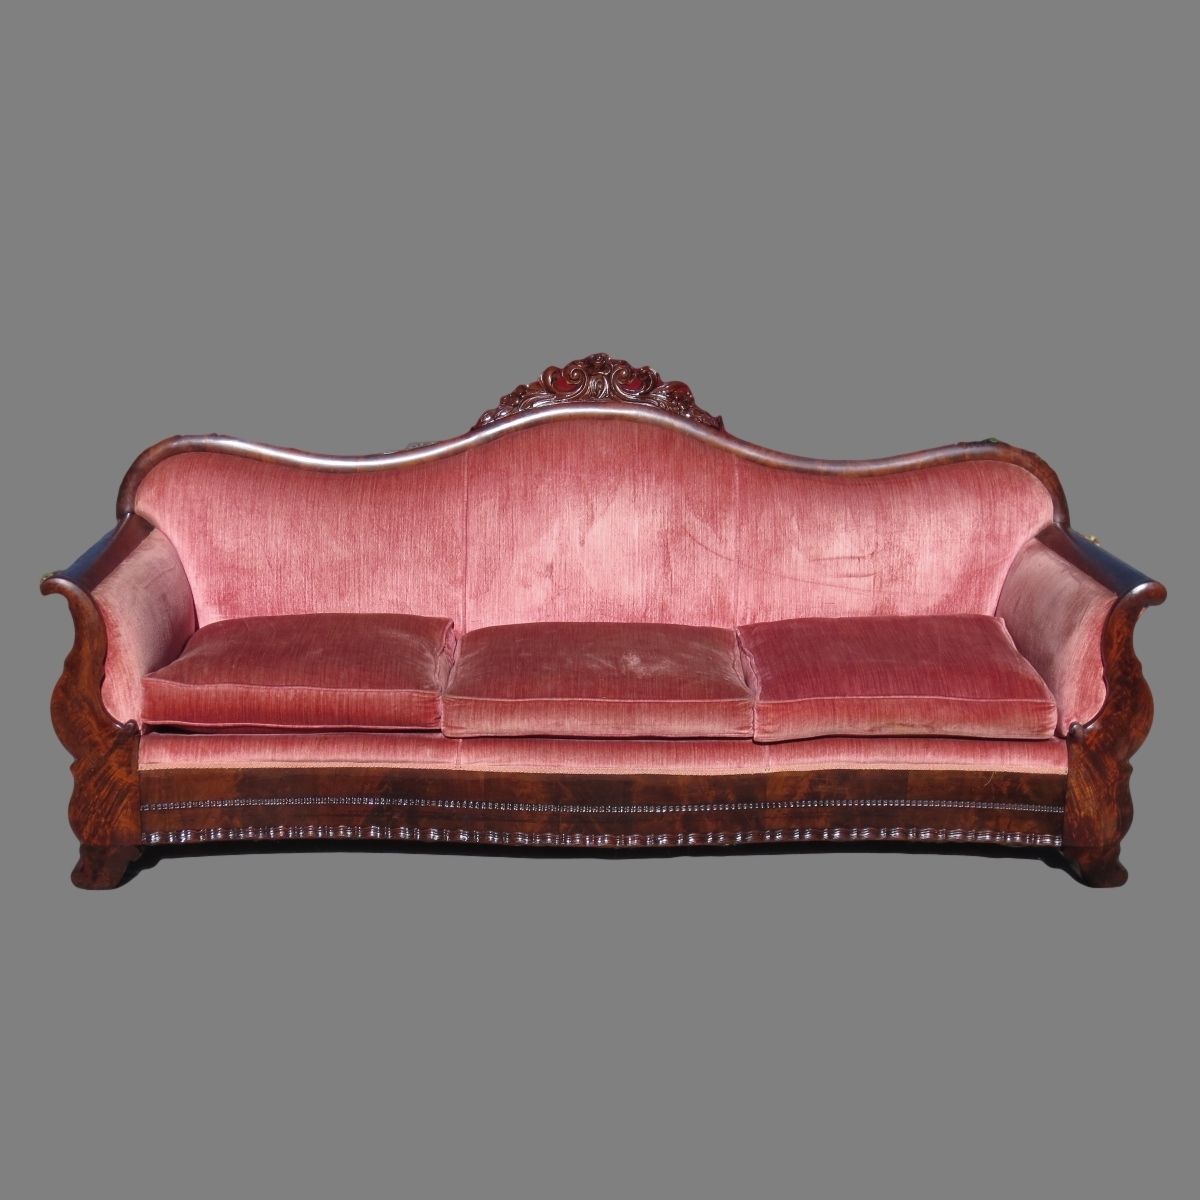 Fancy Antique Couch 50 For Your Sofa Room Ideas With Antique Couch With Regard To Antique Sofas (Photo 10 of 10)